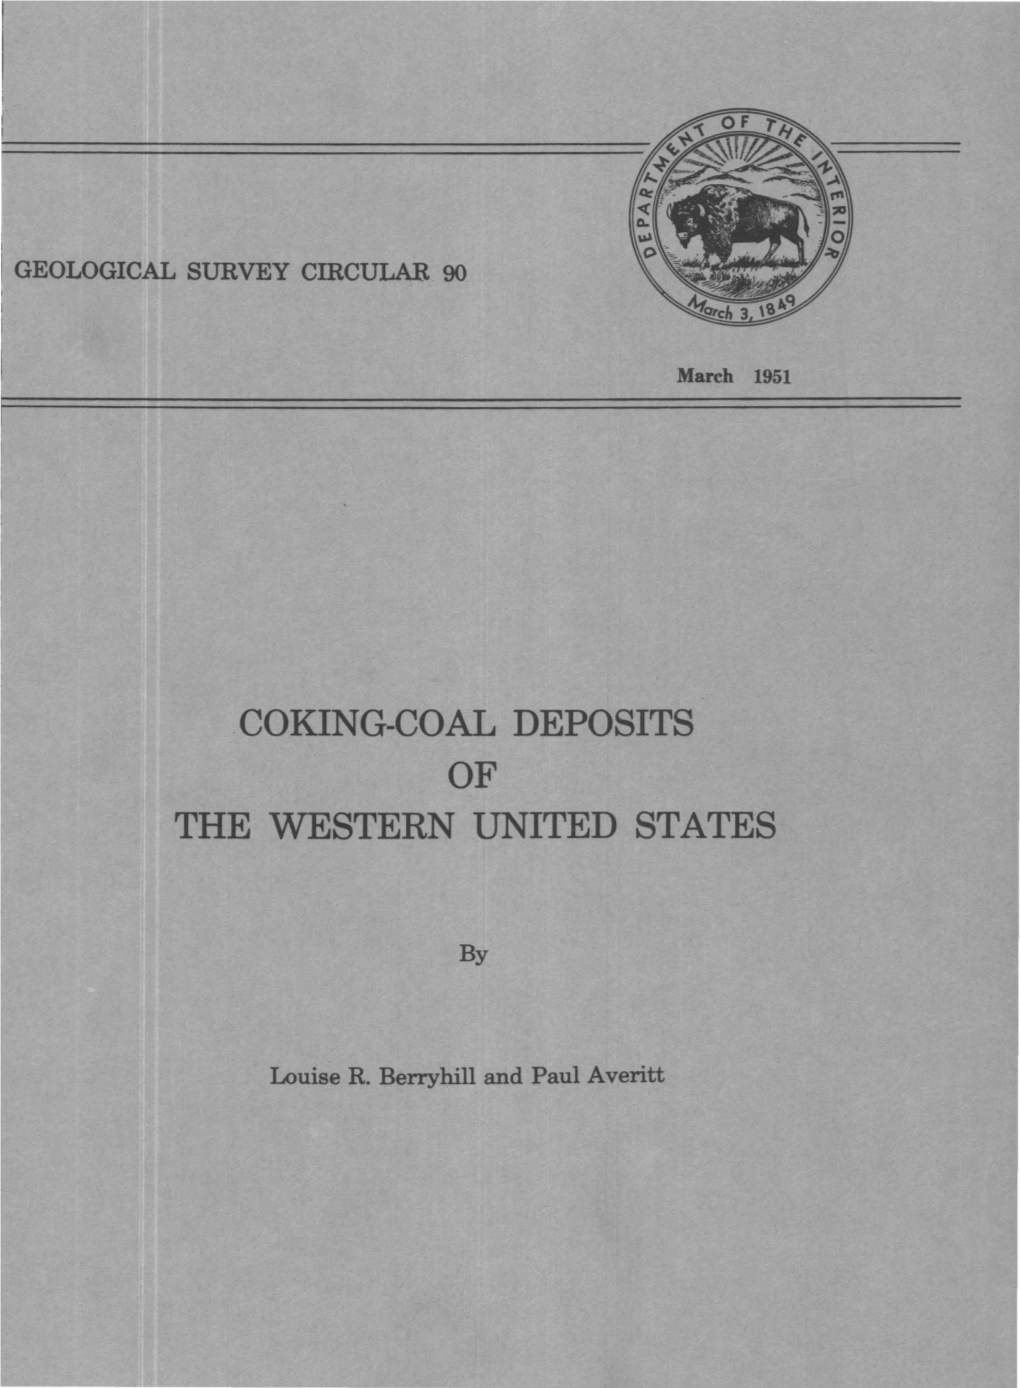 Coking-Coal Deposits the Western United States